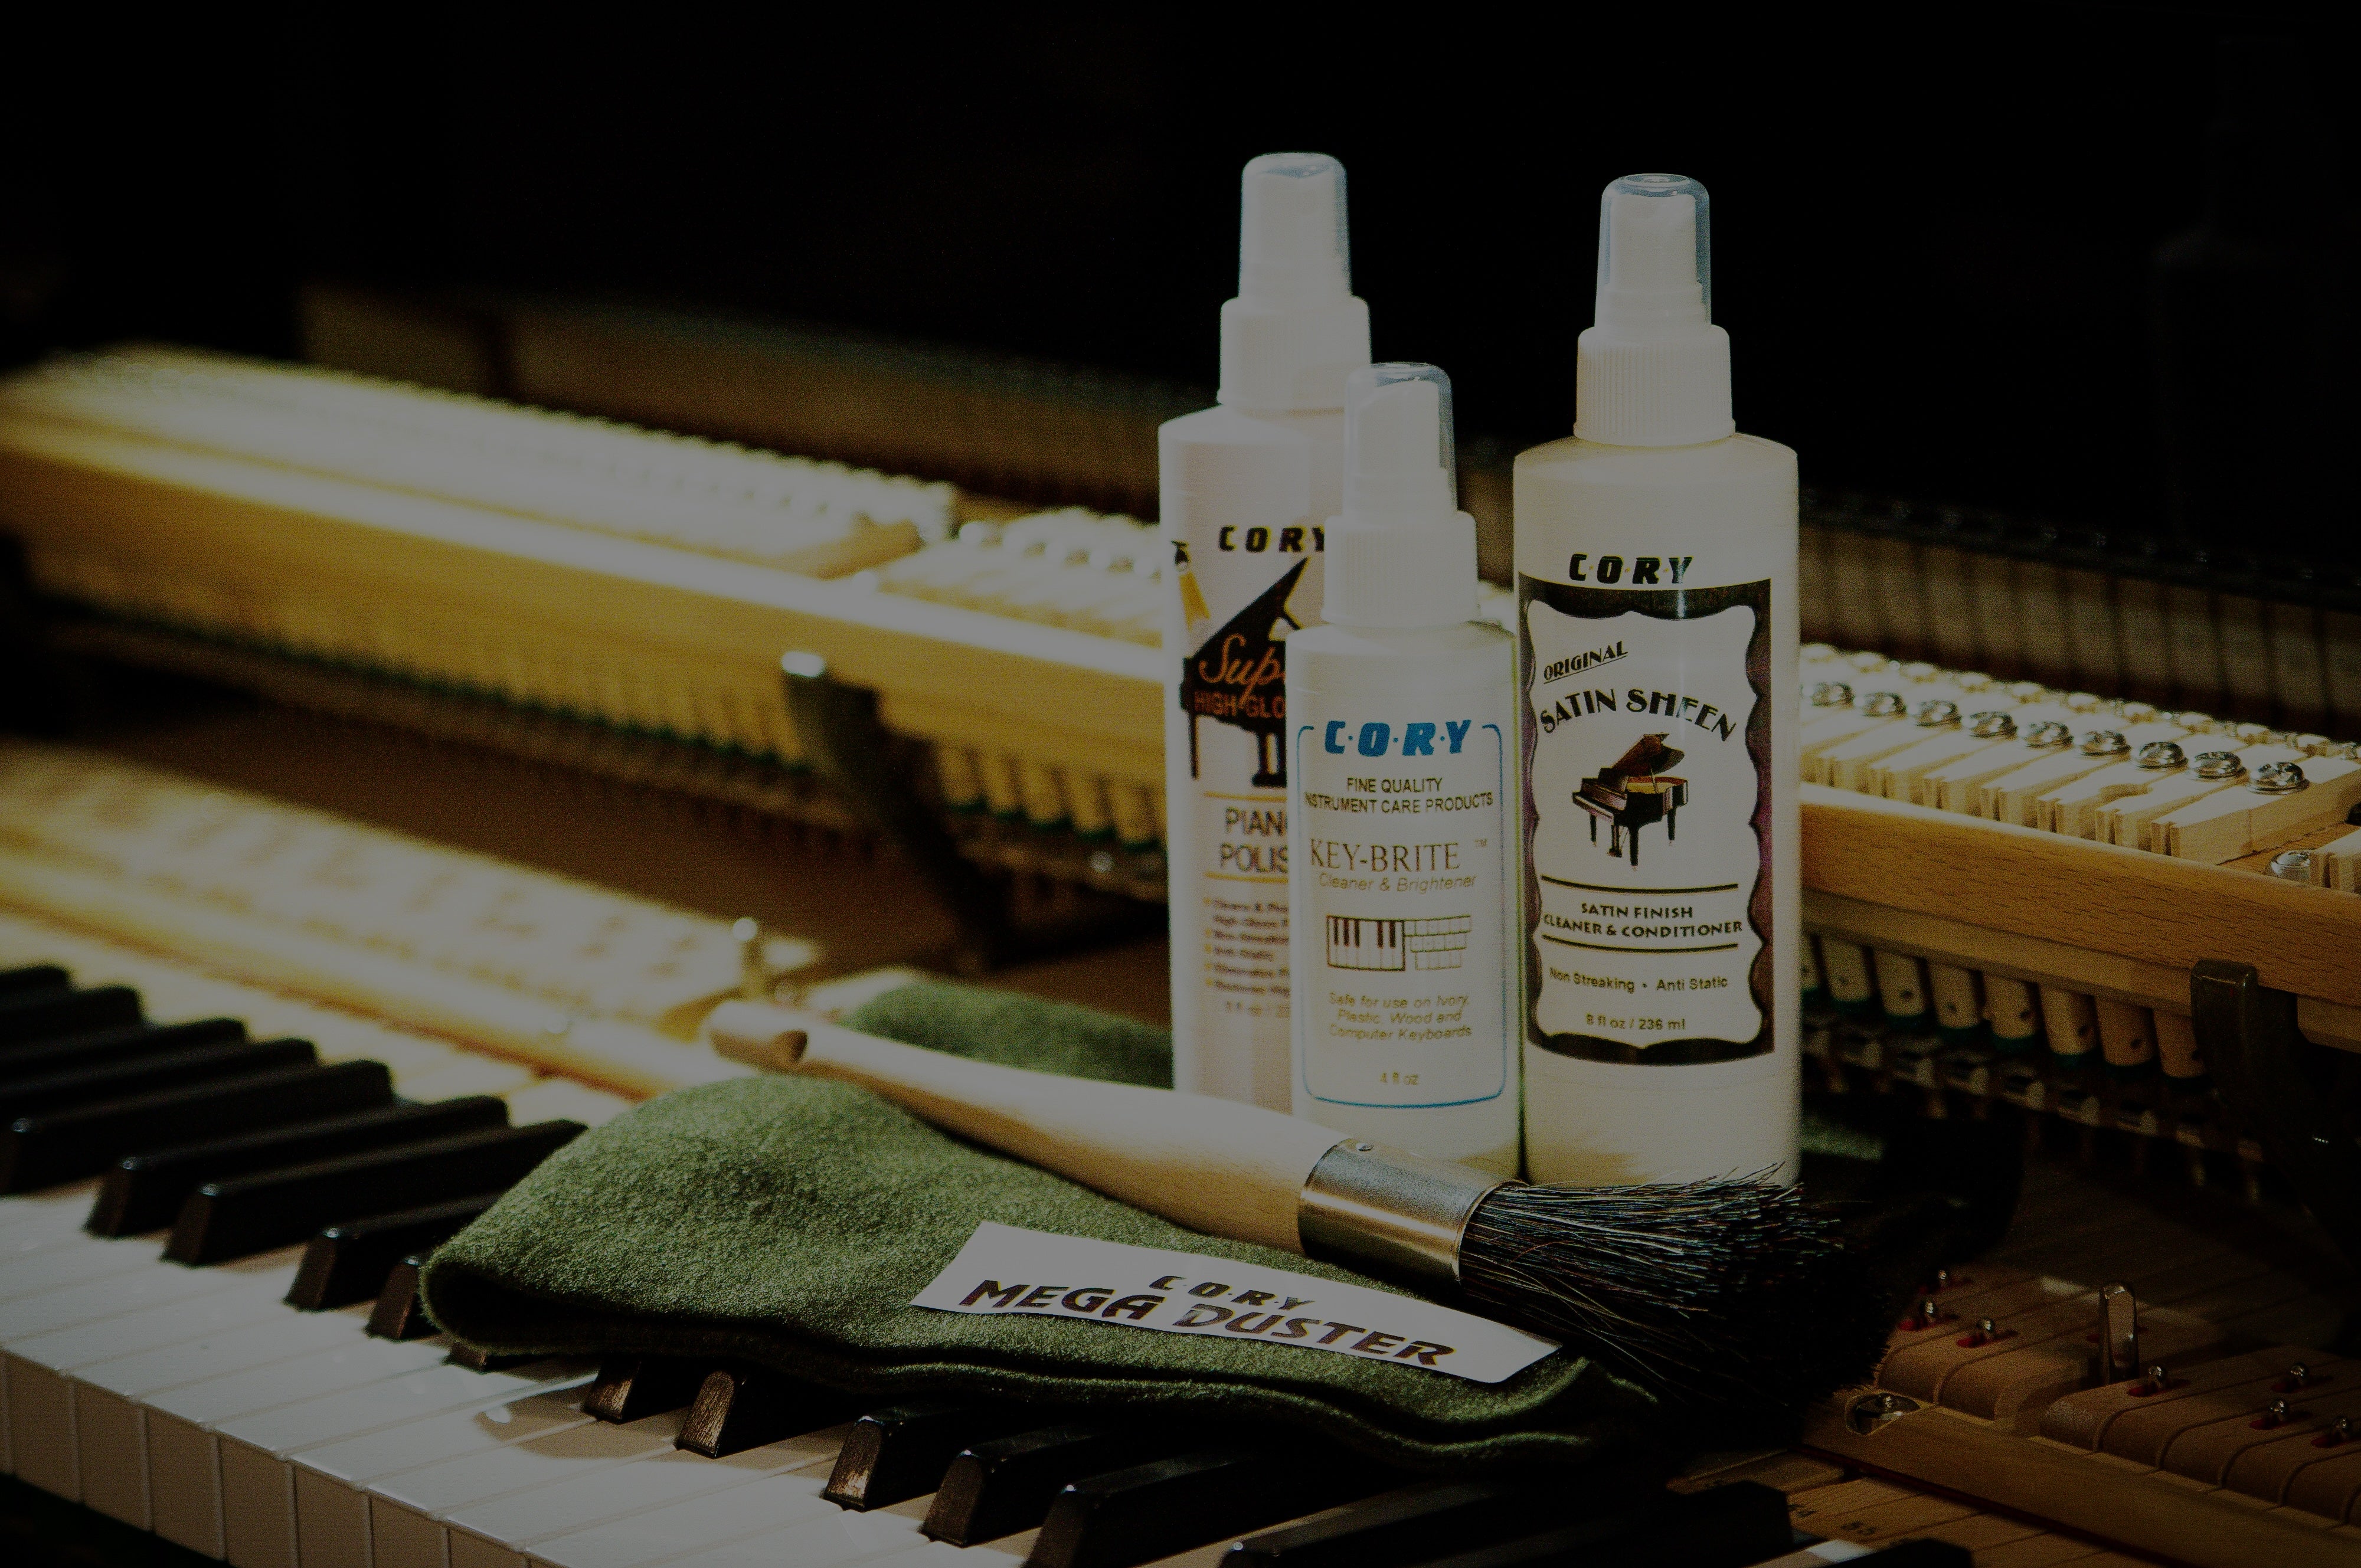 Piano Cleaning Supplies - Artisan Piano Tuning and Restoration